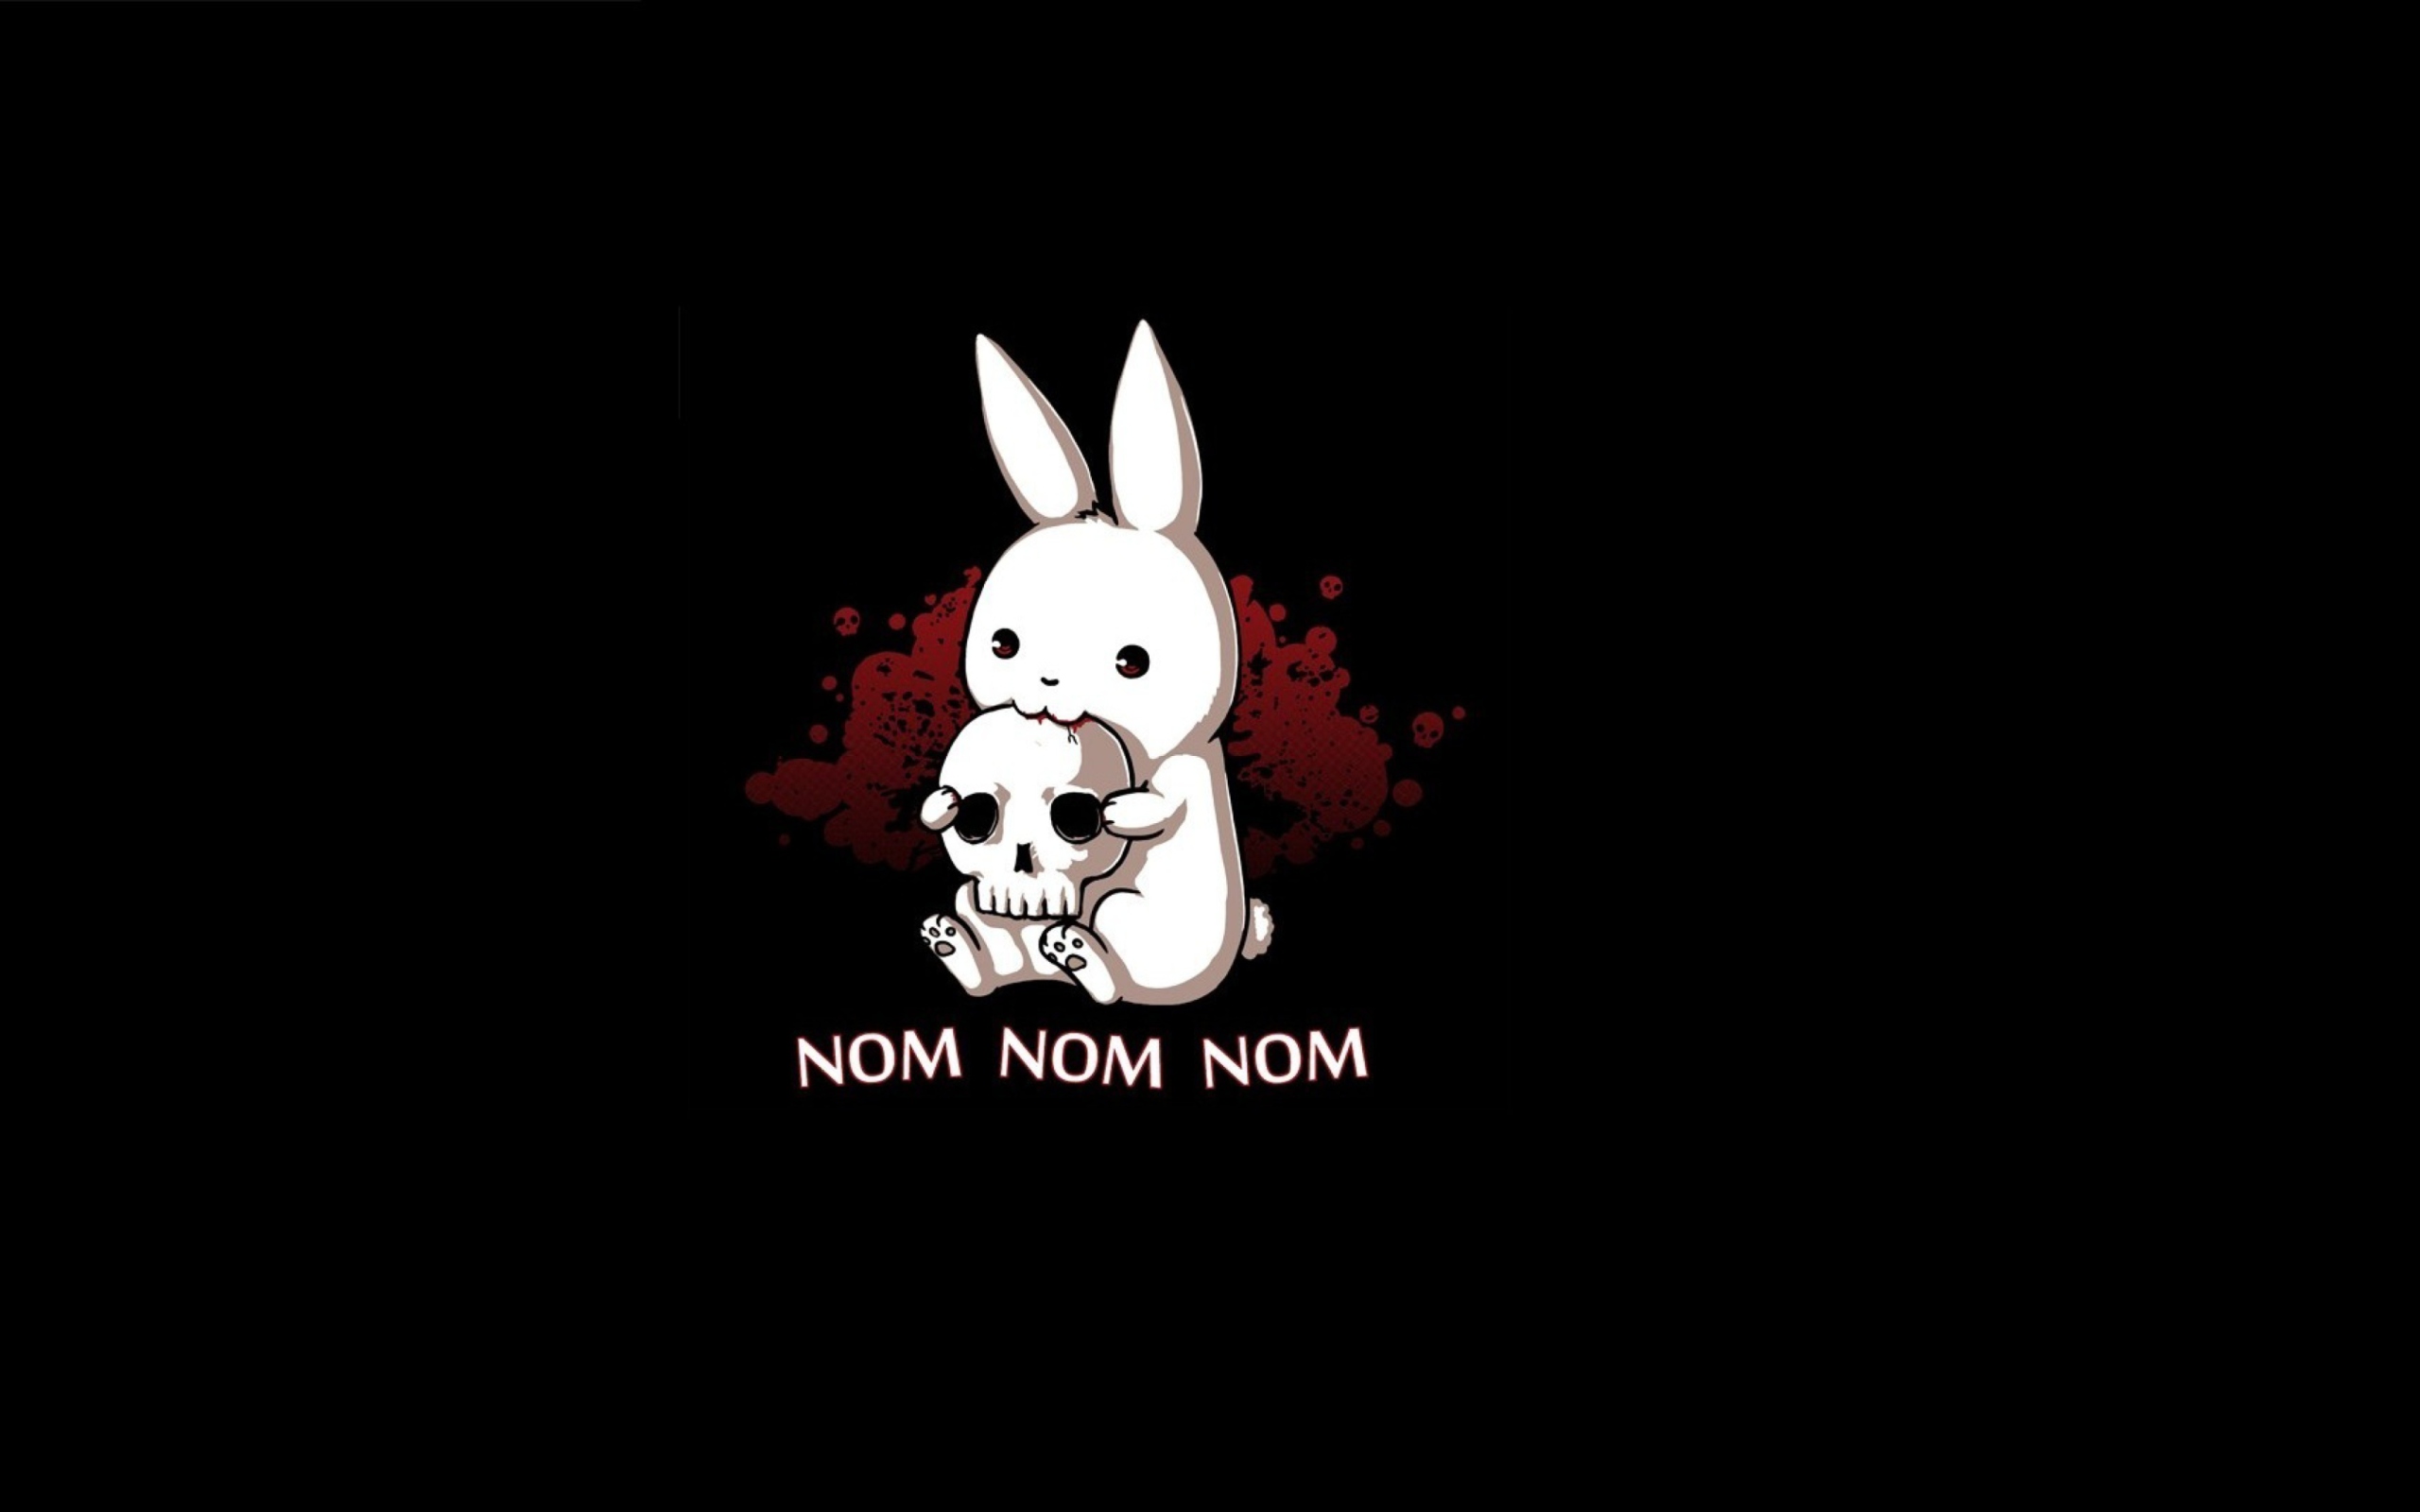 Blood-Thirsty Hare wallpaper 2560x1600